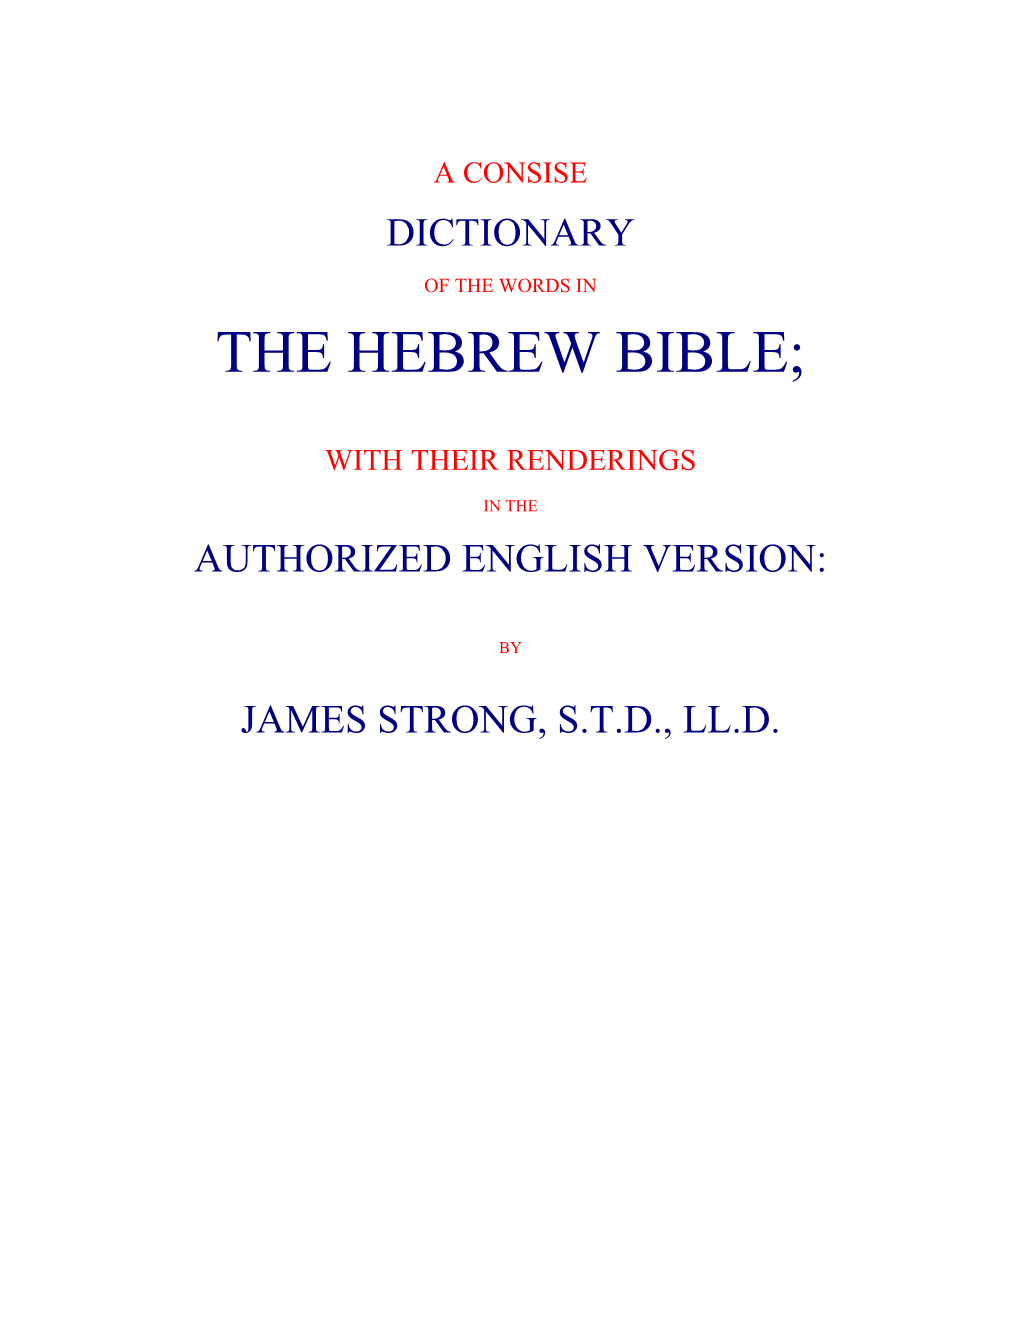 Strong's Hebrew Dictionary